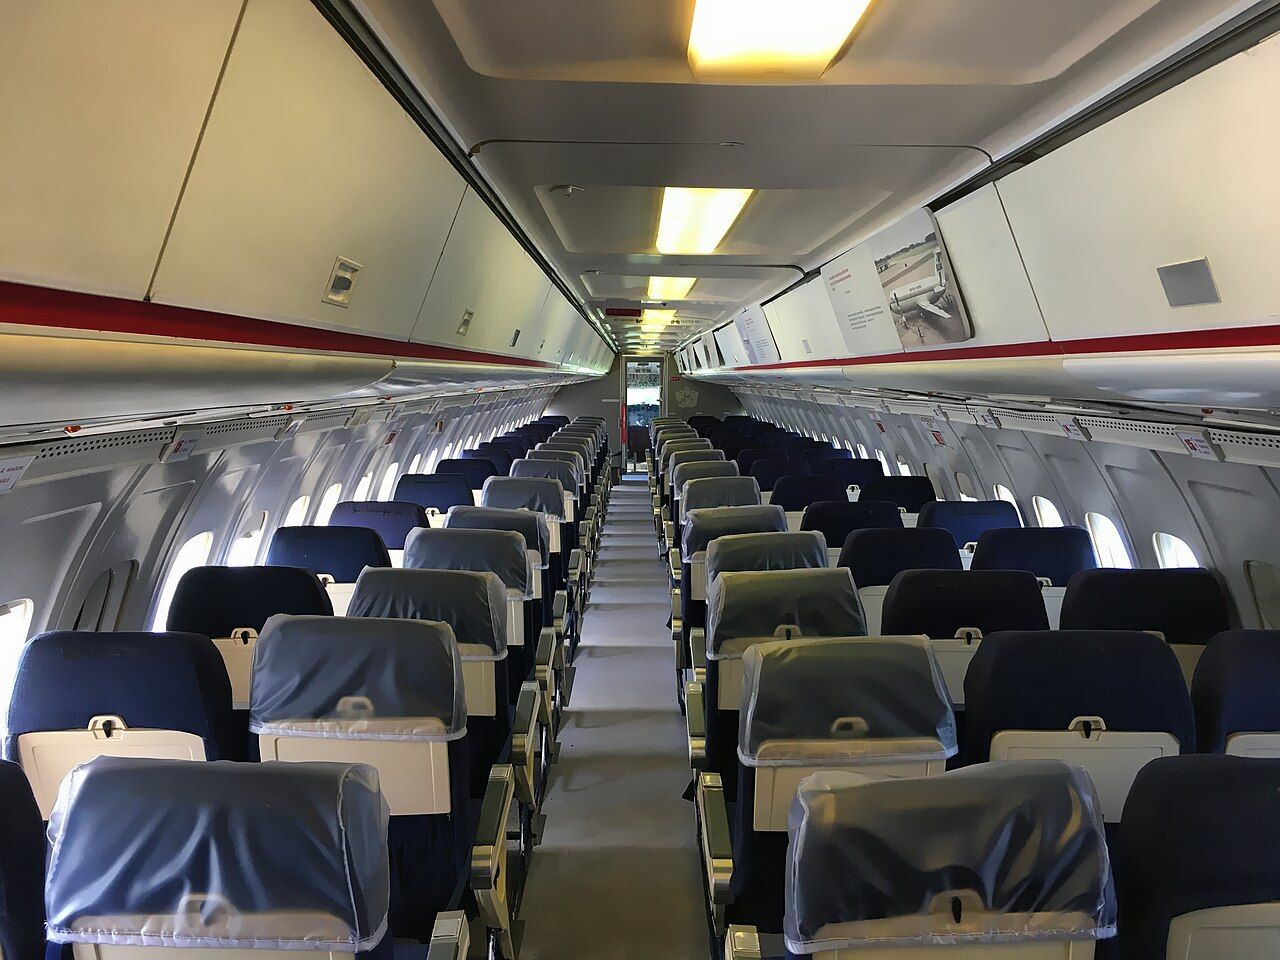 Inide the main cabin of A British Airways BAC 1-11.